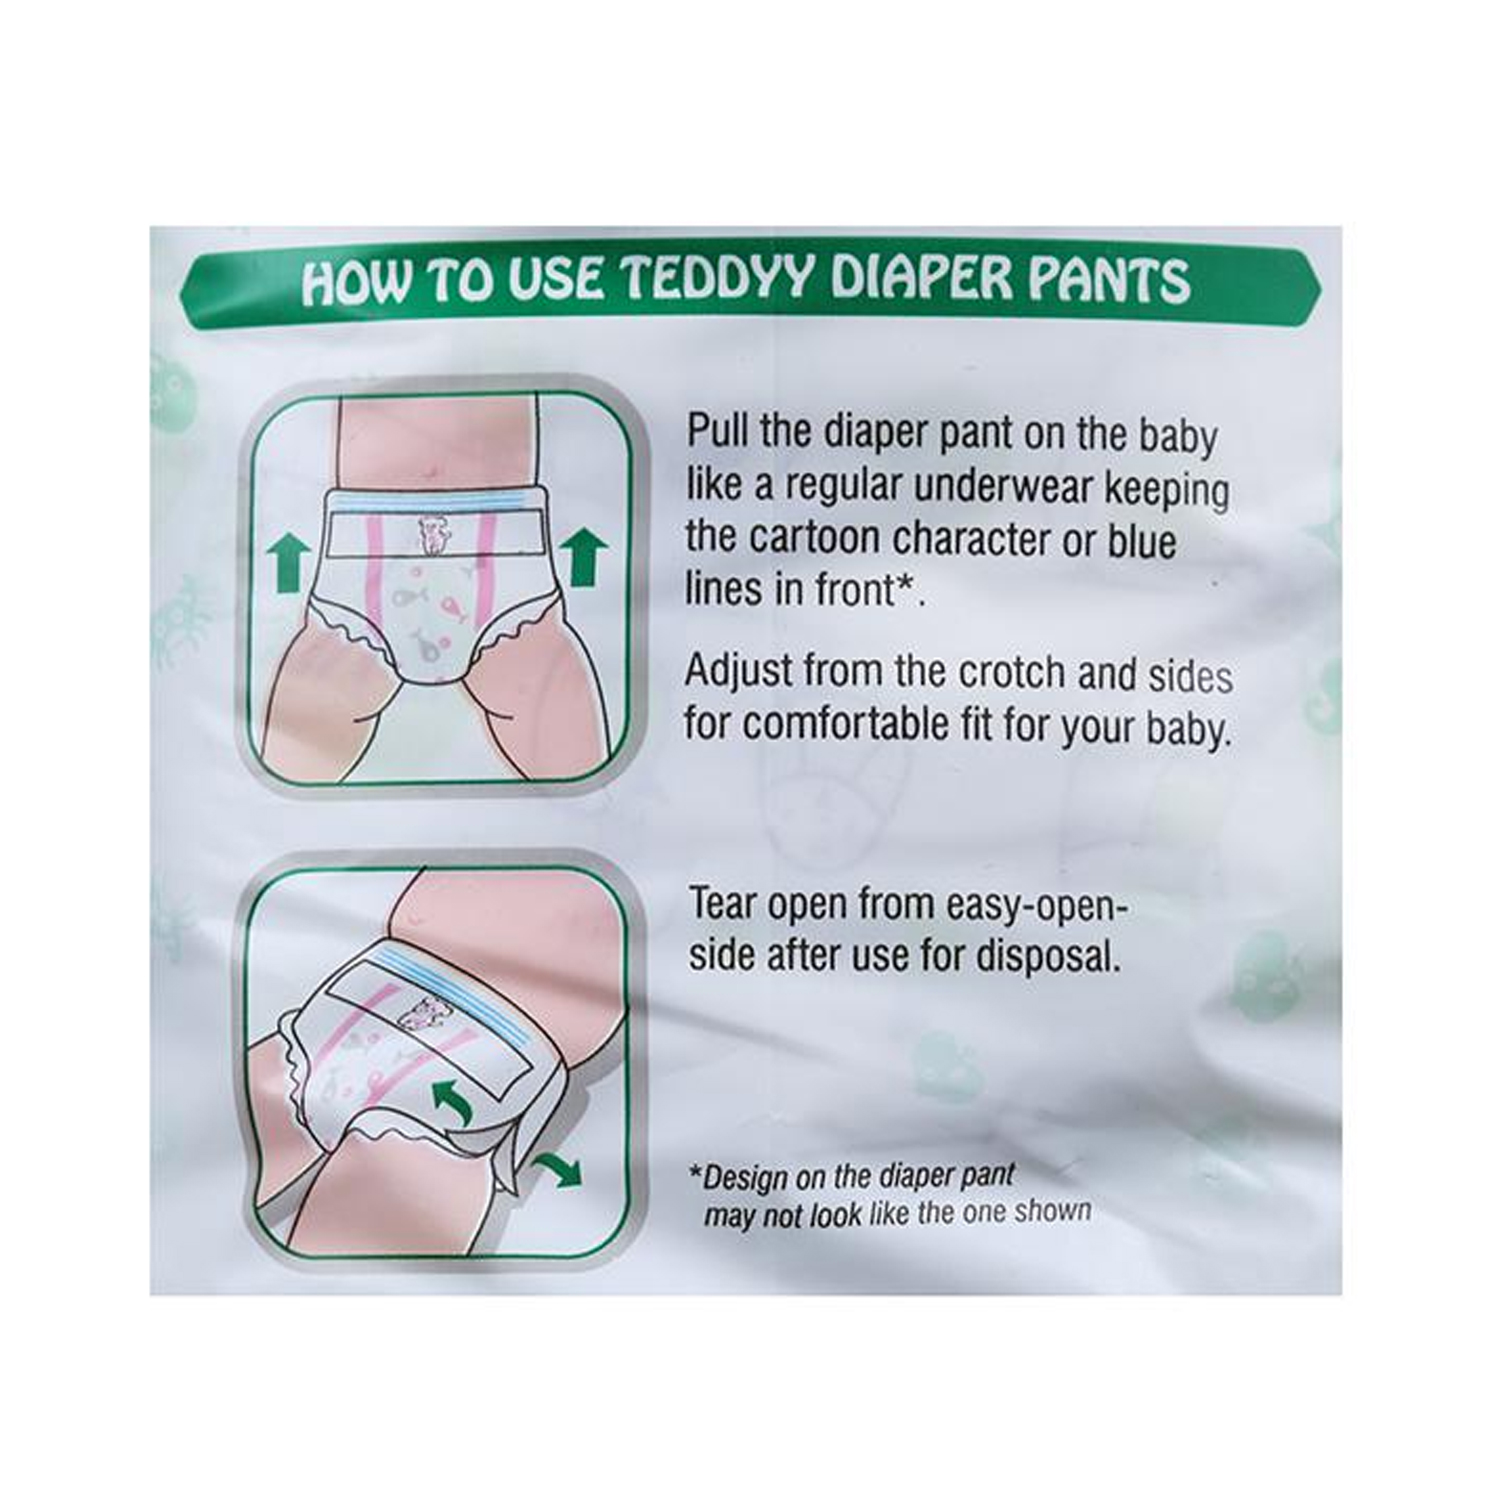 Buy 1 Teddy Large Baby Diaper Pants For Baby Weight 9-13Kg Pack Of 30 Diapers  Pants And 1 Baby Wet Wipes Extra Soft And Gentle, Enriched With Aloe Vera,  Hypoallergenic Formula Pack